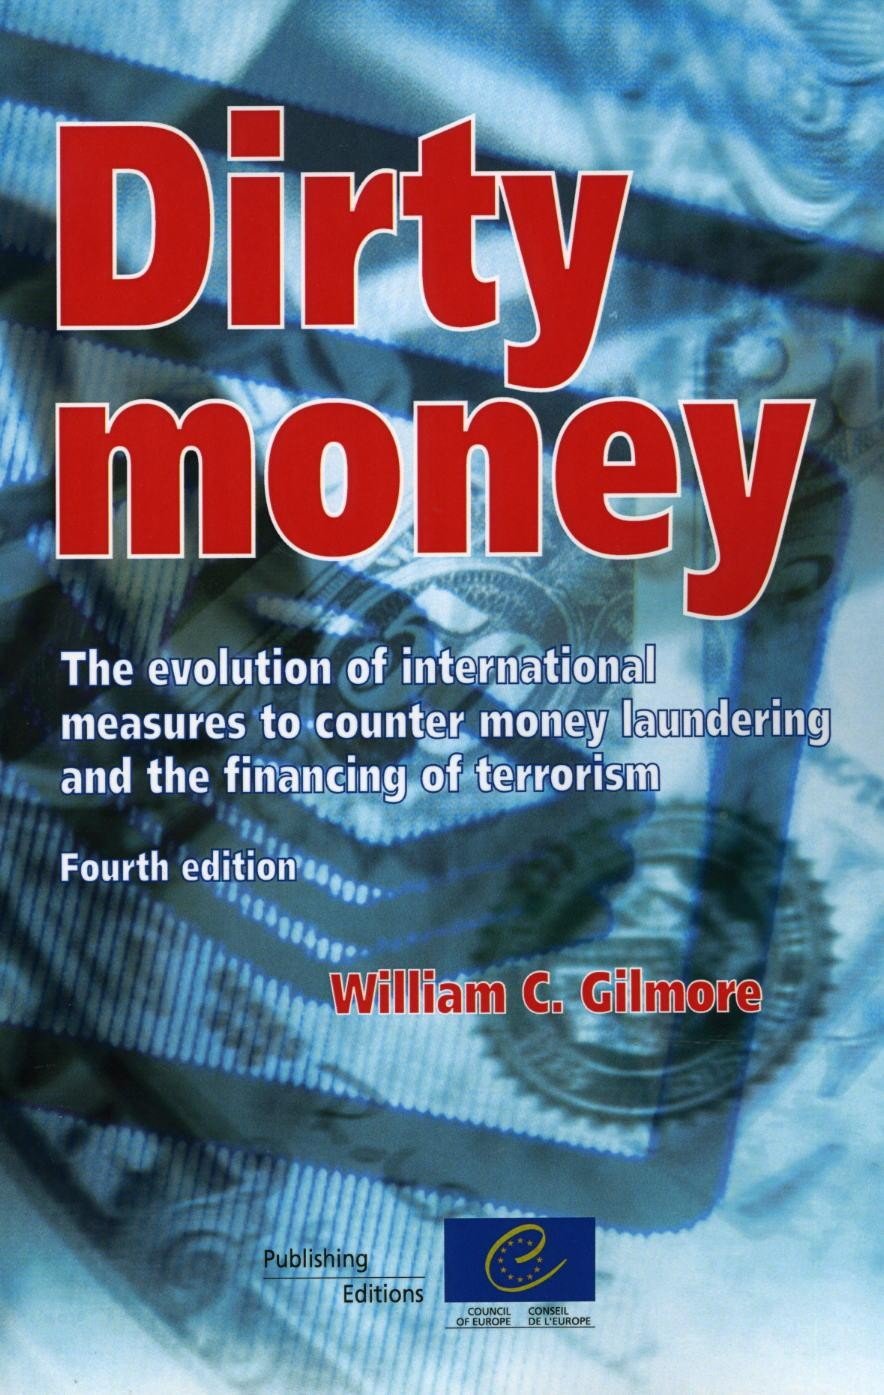 to　international　The　of　the　money　and　PDF　(4th　money　of　laundering　measures　Dirty　edition)　evolution　counter　financing　terrorism